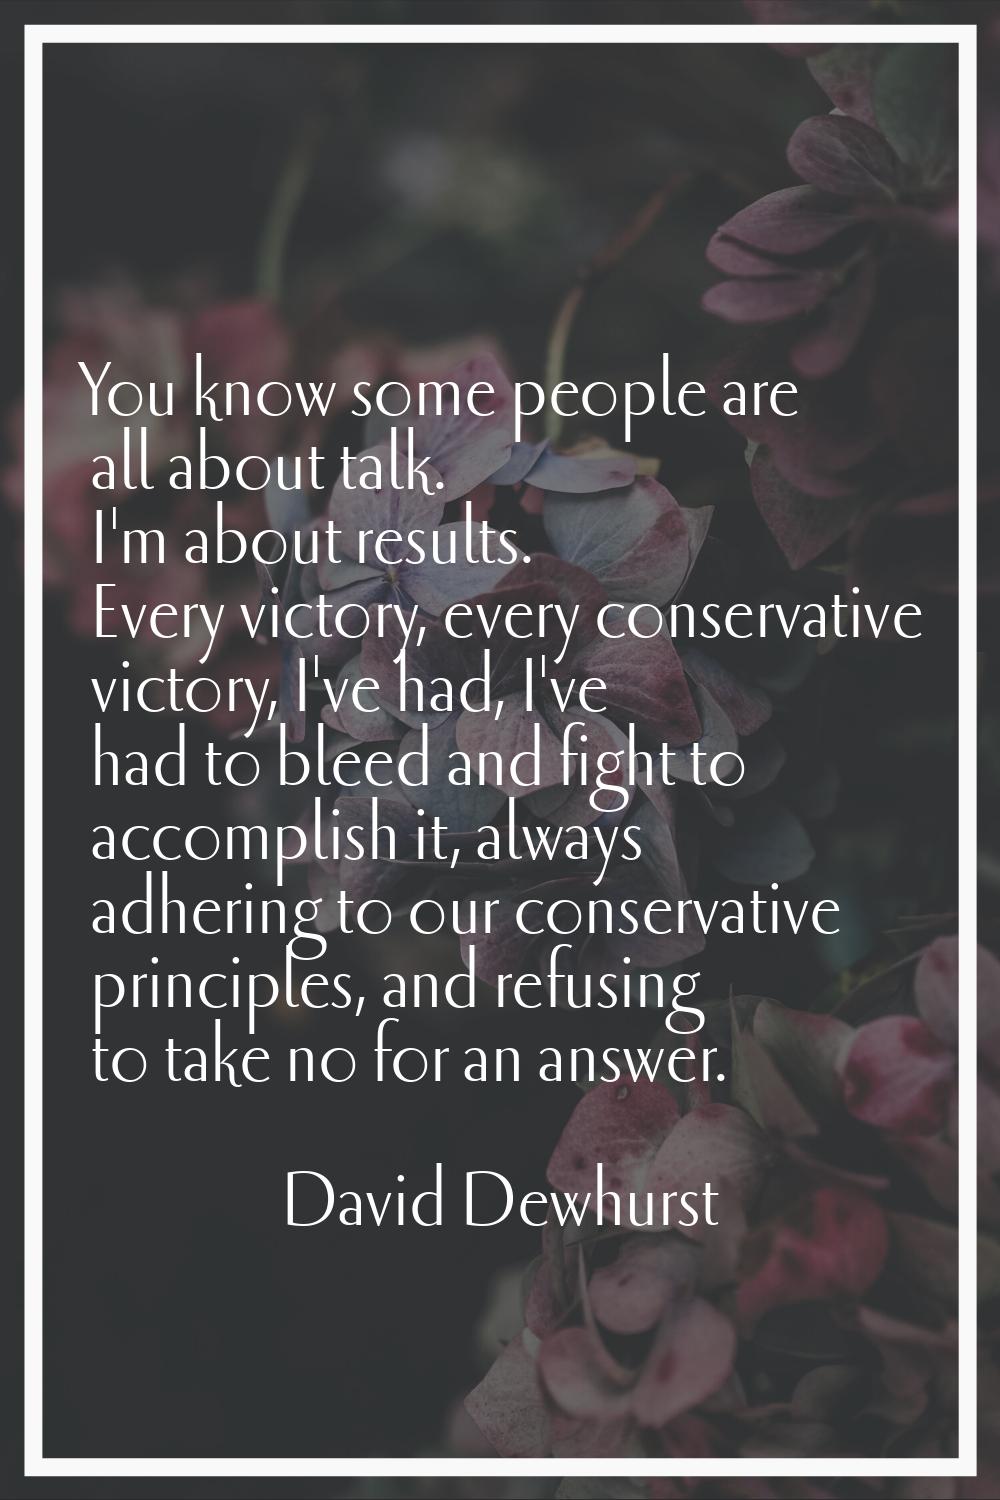 You know some people are all about talk. I'm about results. Every victory, every conservative victo